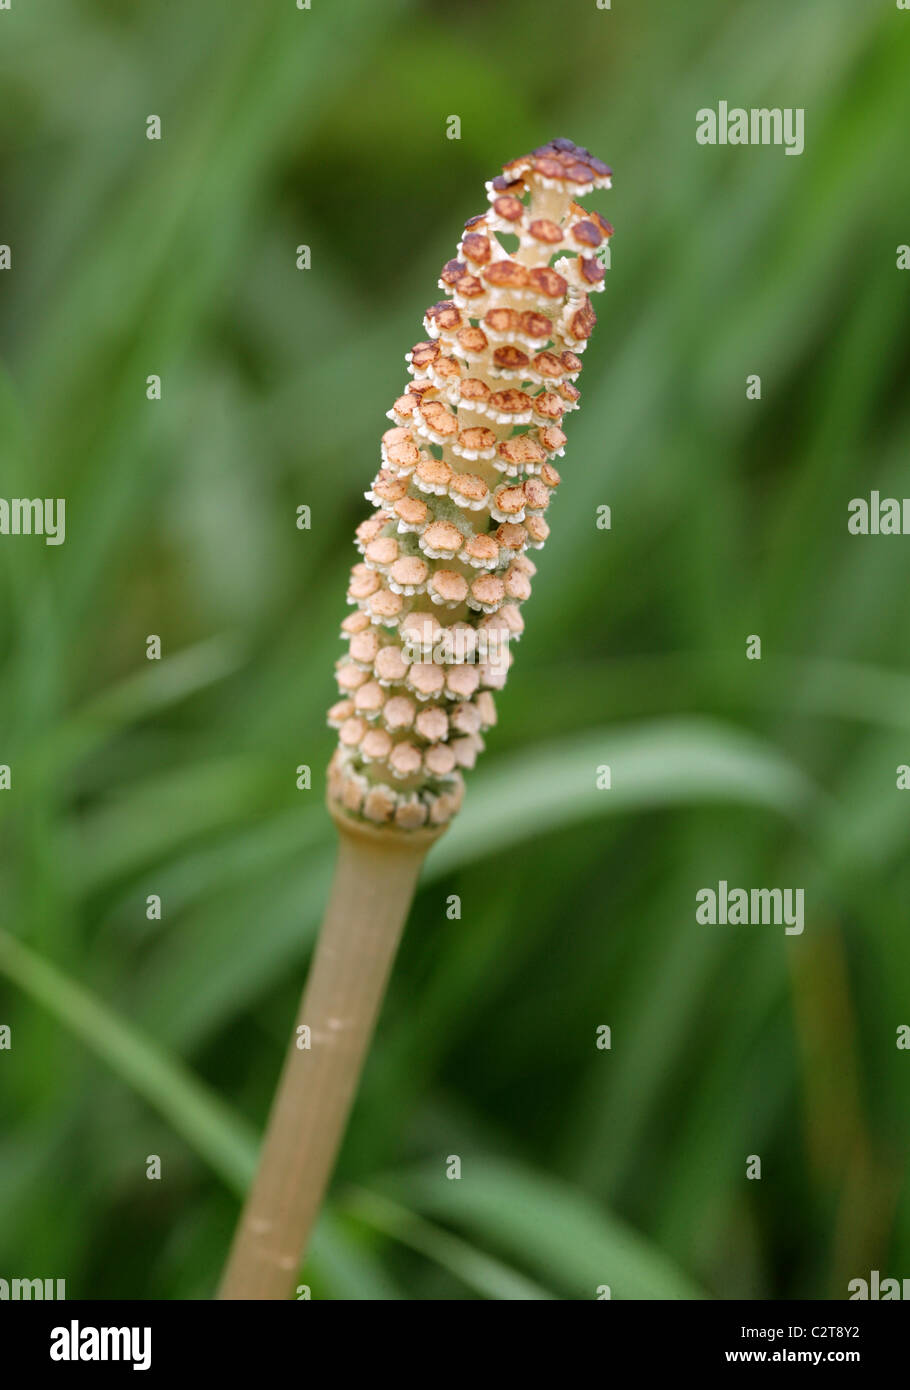 Spring Shoot of Field or Common Horsetail, Equisetum arvense, Equisetaceae. Fertile Sprout with Conelike Strobilus. Stock Photo